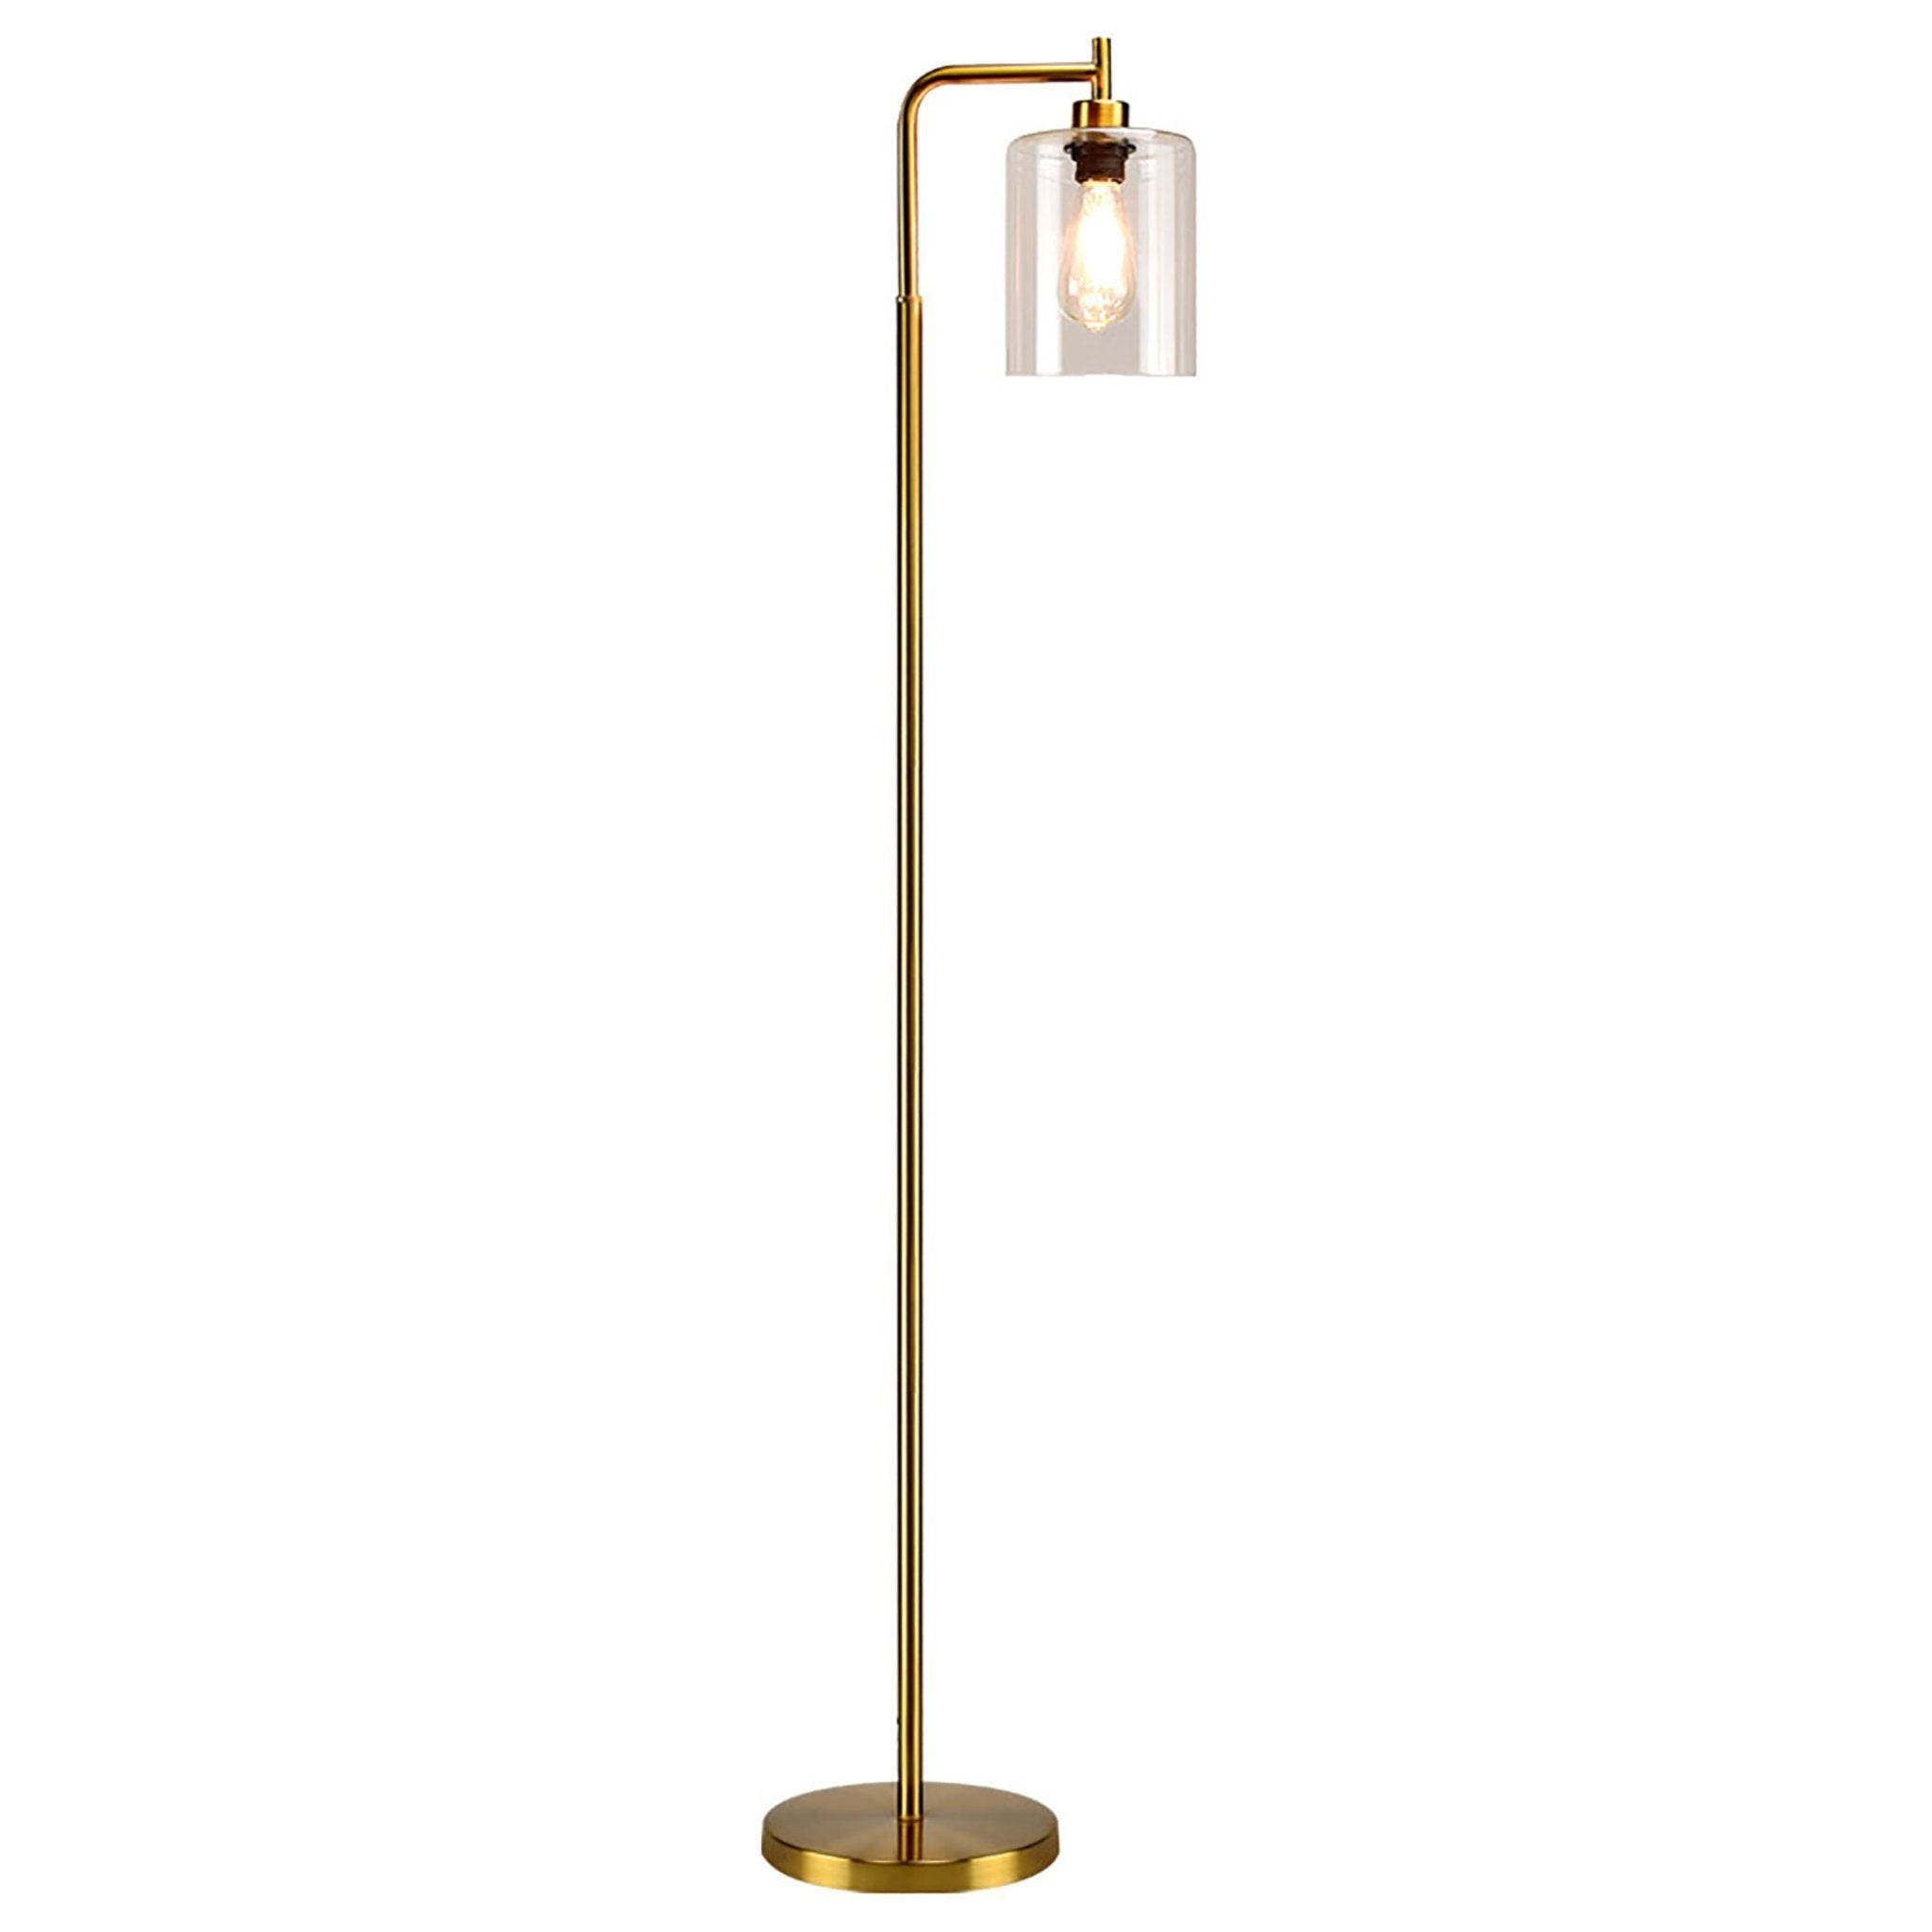 DLLT Modern Floor Lamp, Metal Reading Tall Pole Light with Hanging Glass Shade, Farmhouse Standing Industrial Floor Lamps, Brass Tall Lighting for Living Room Bedroom Office (Bulb Included) - WSFLL005-G 1 | Depuley